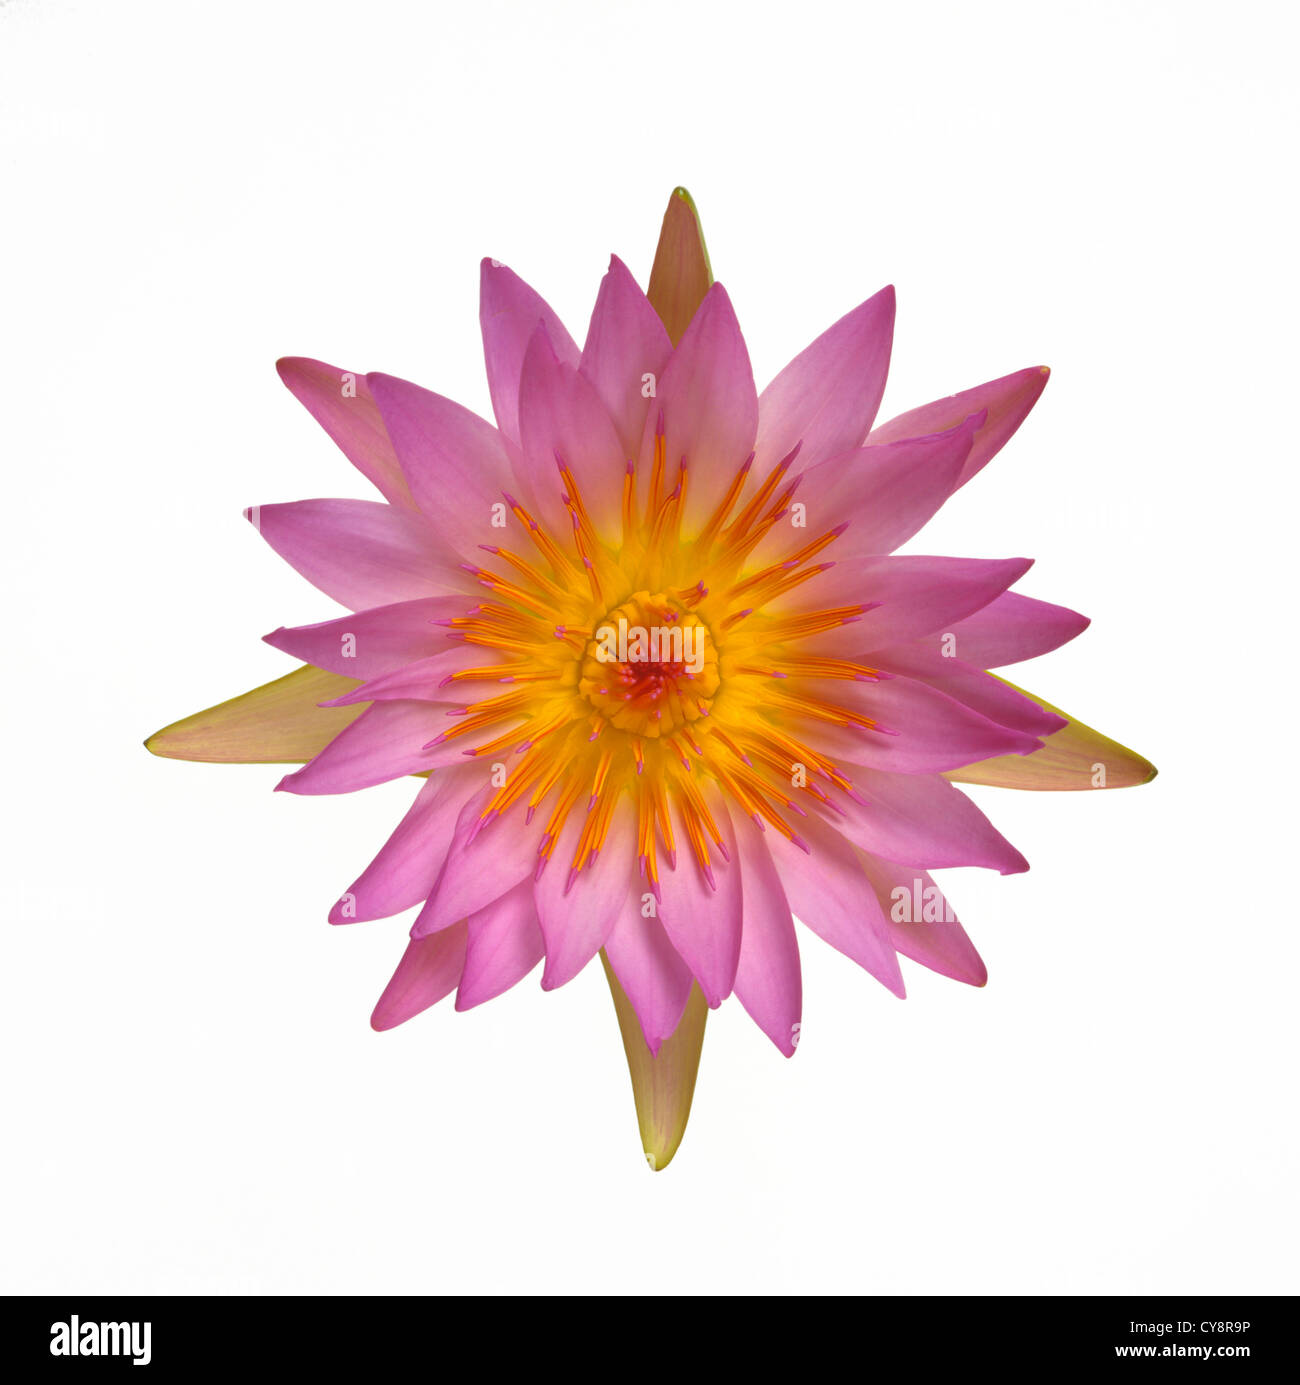 Nymphaea, Water lily. Top view of a symmetric pink and yellow flower on a white background. Stock Photo